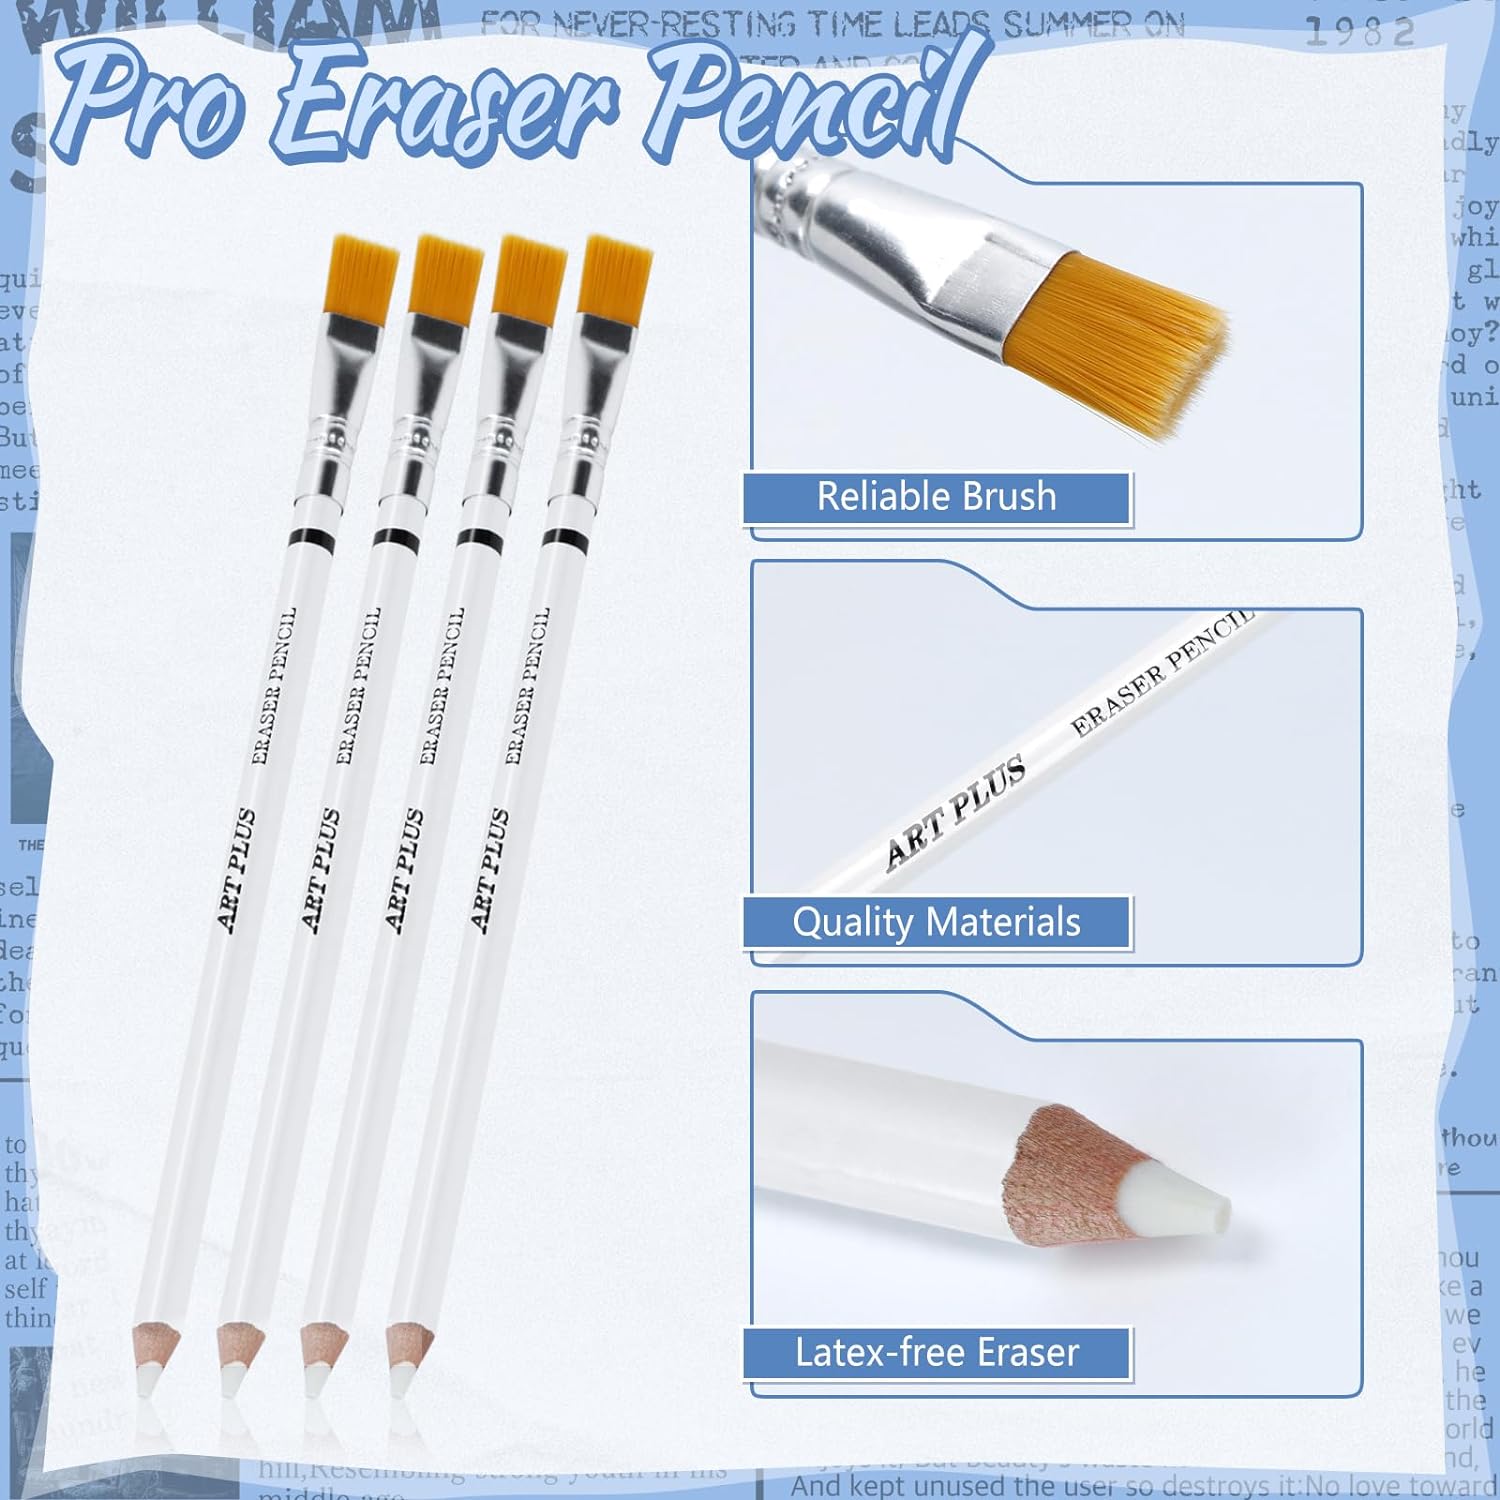 12 Pack Eraser Pencil with Brush